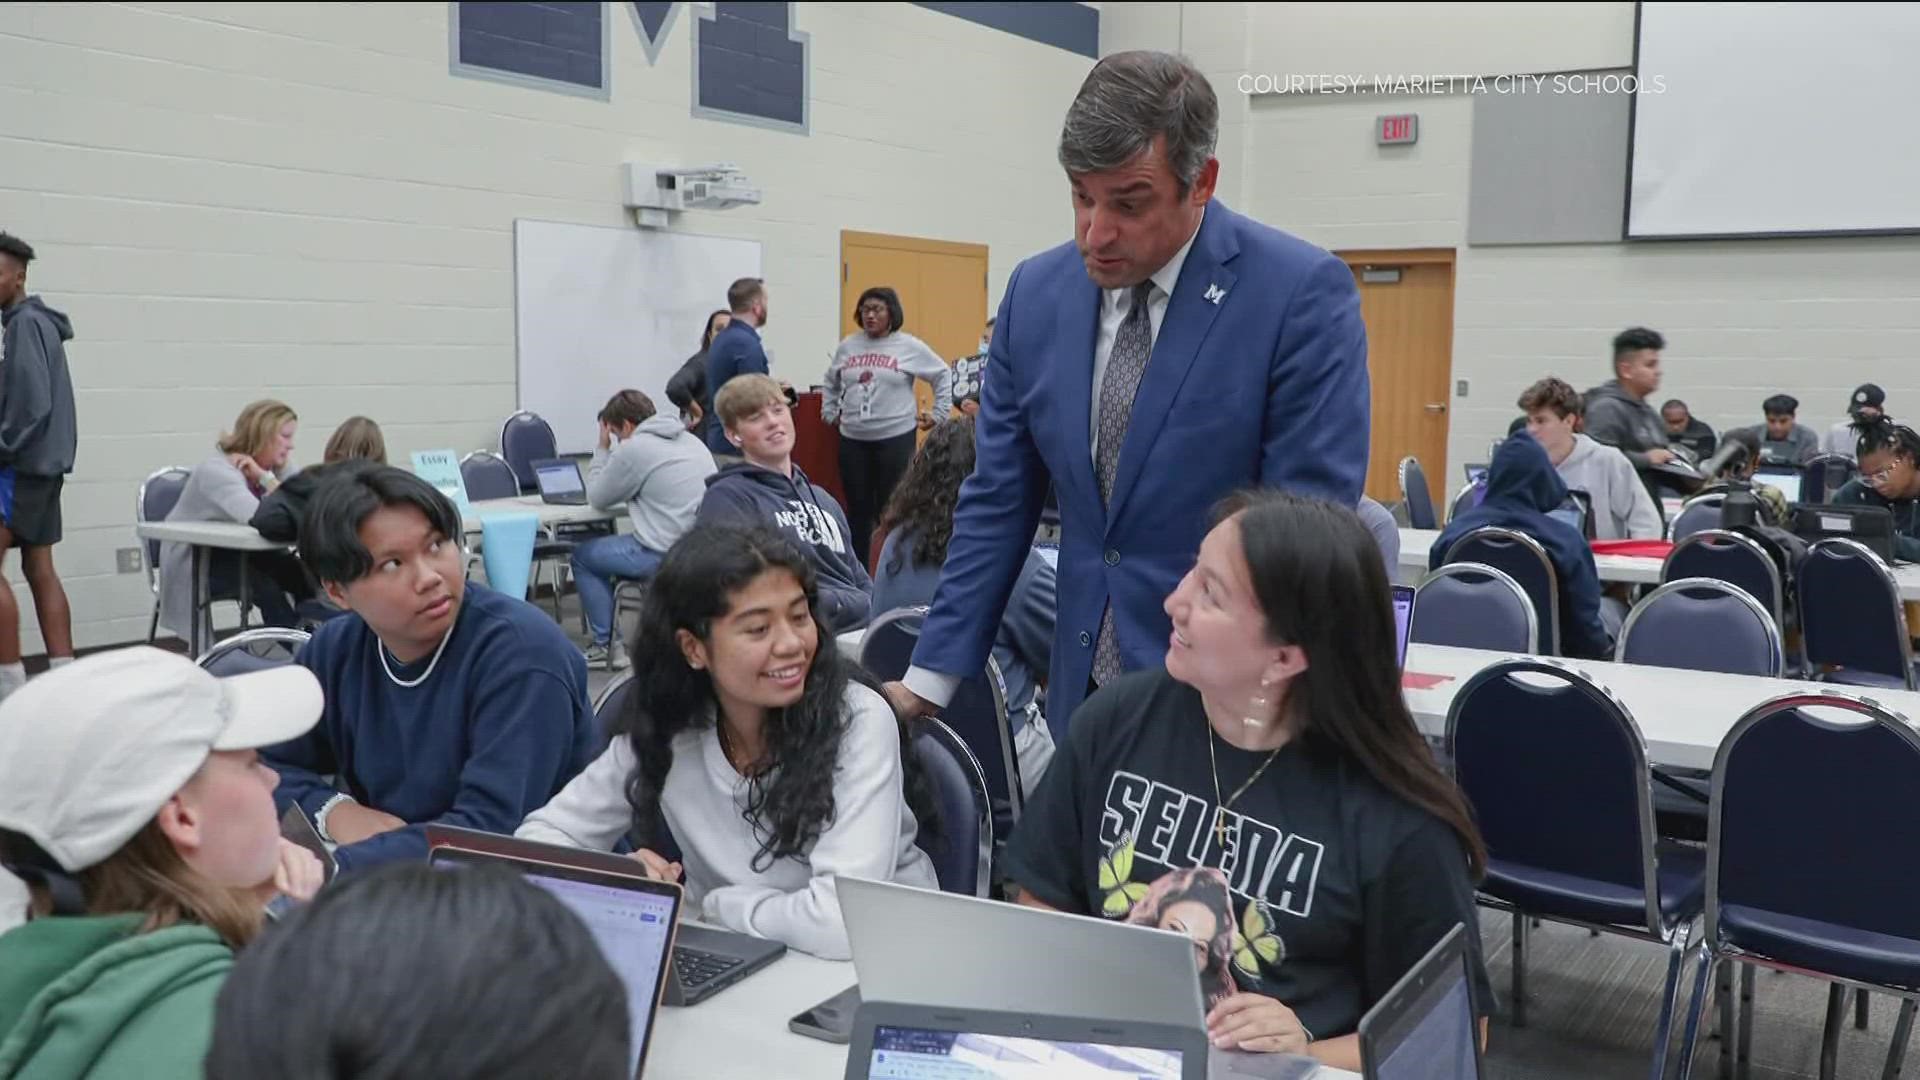 Marietta City Schools Superintendent Dr. Grant Rivera is helping seniors cover the cost of college applications.